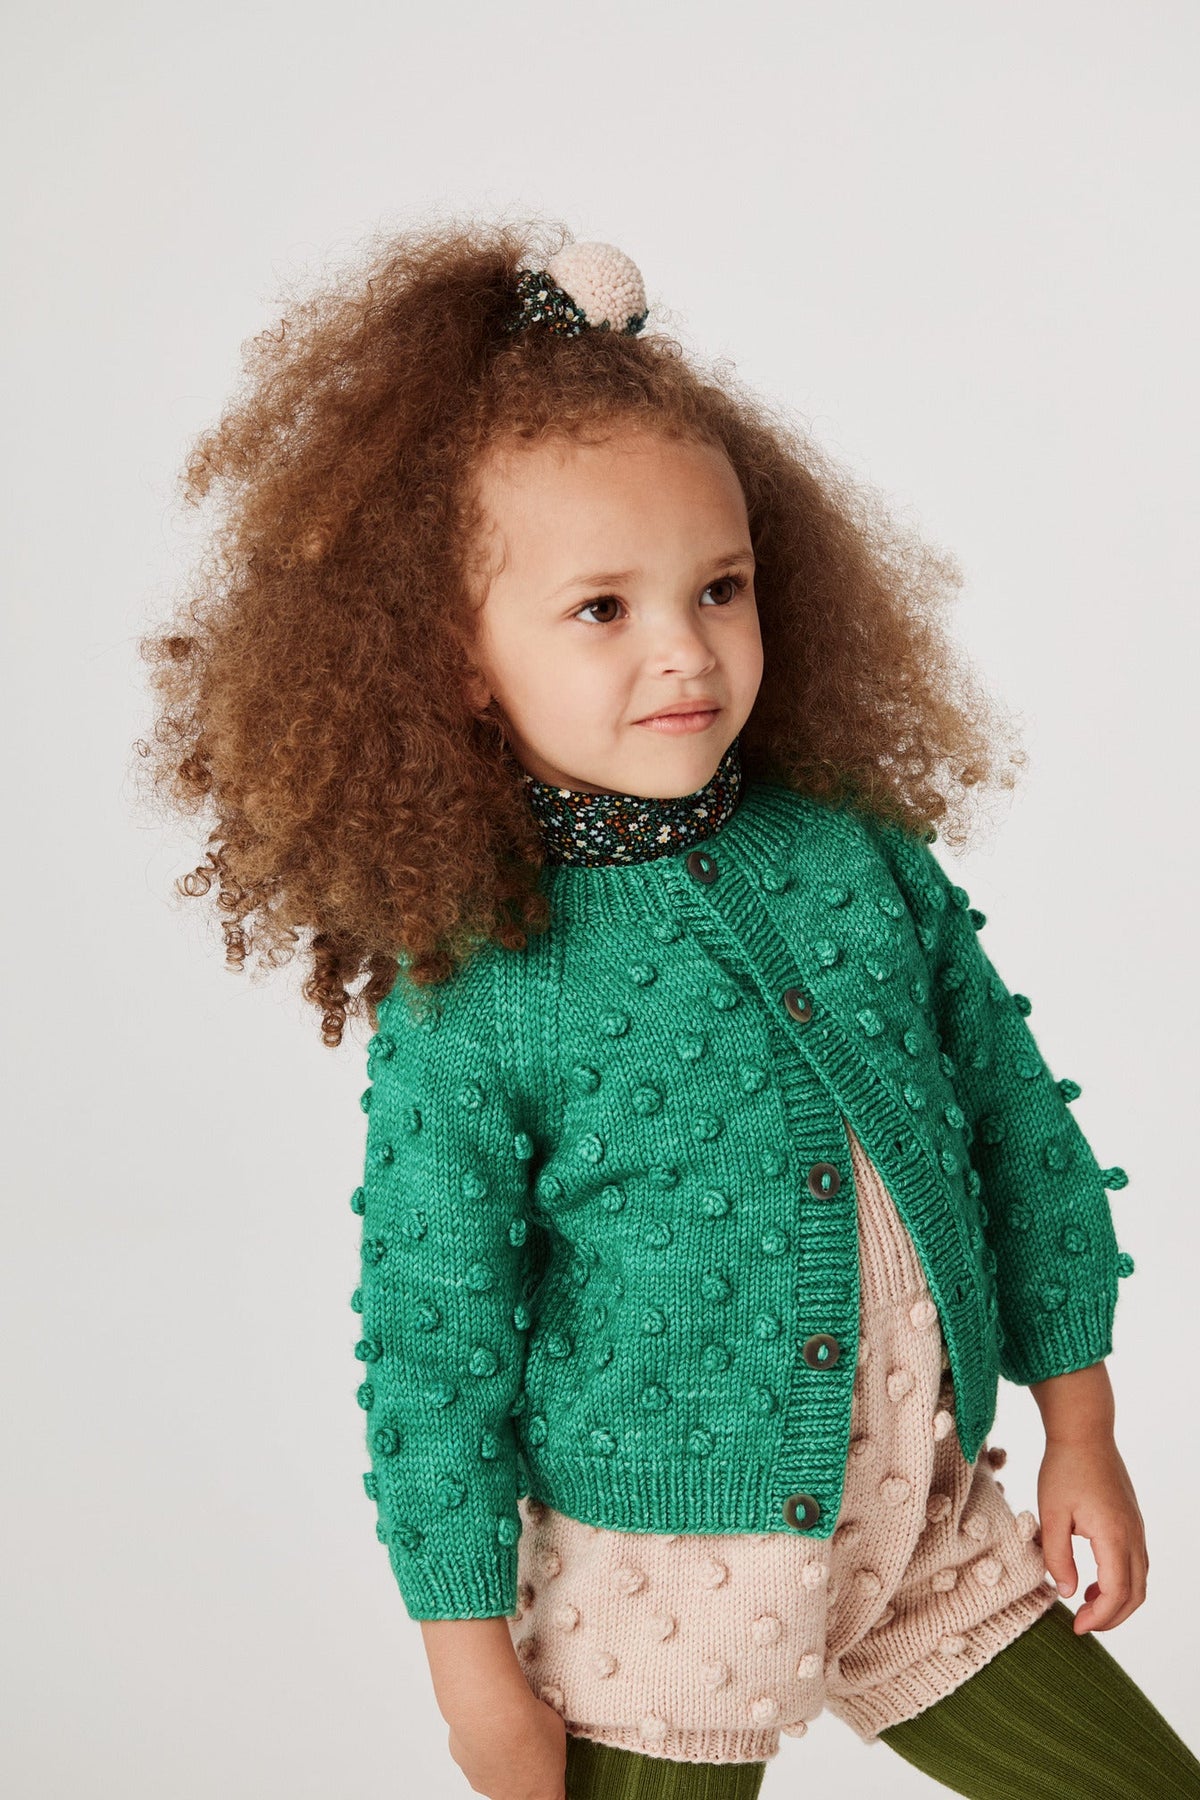 Popcorn Cardigan - Emerald+Model is 36 inches tall, 27lbs, wearing a size 12-18m